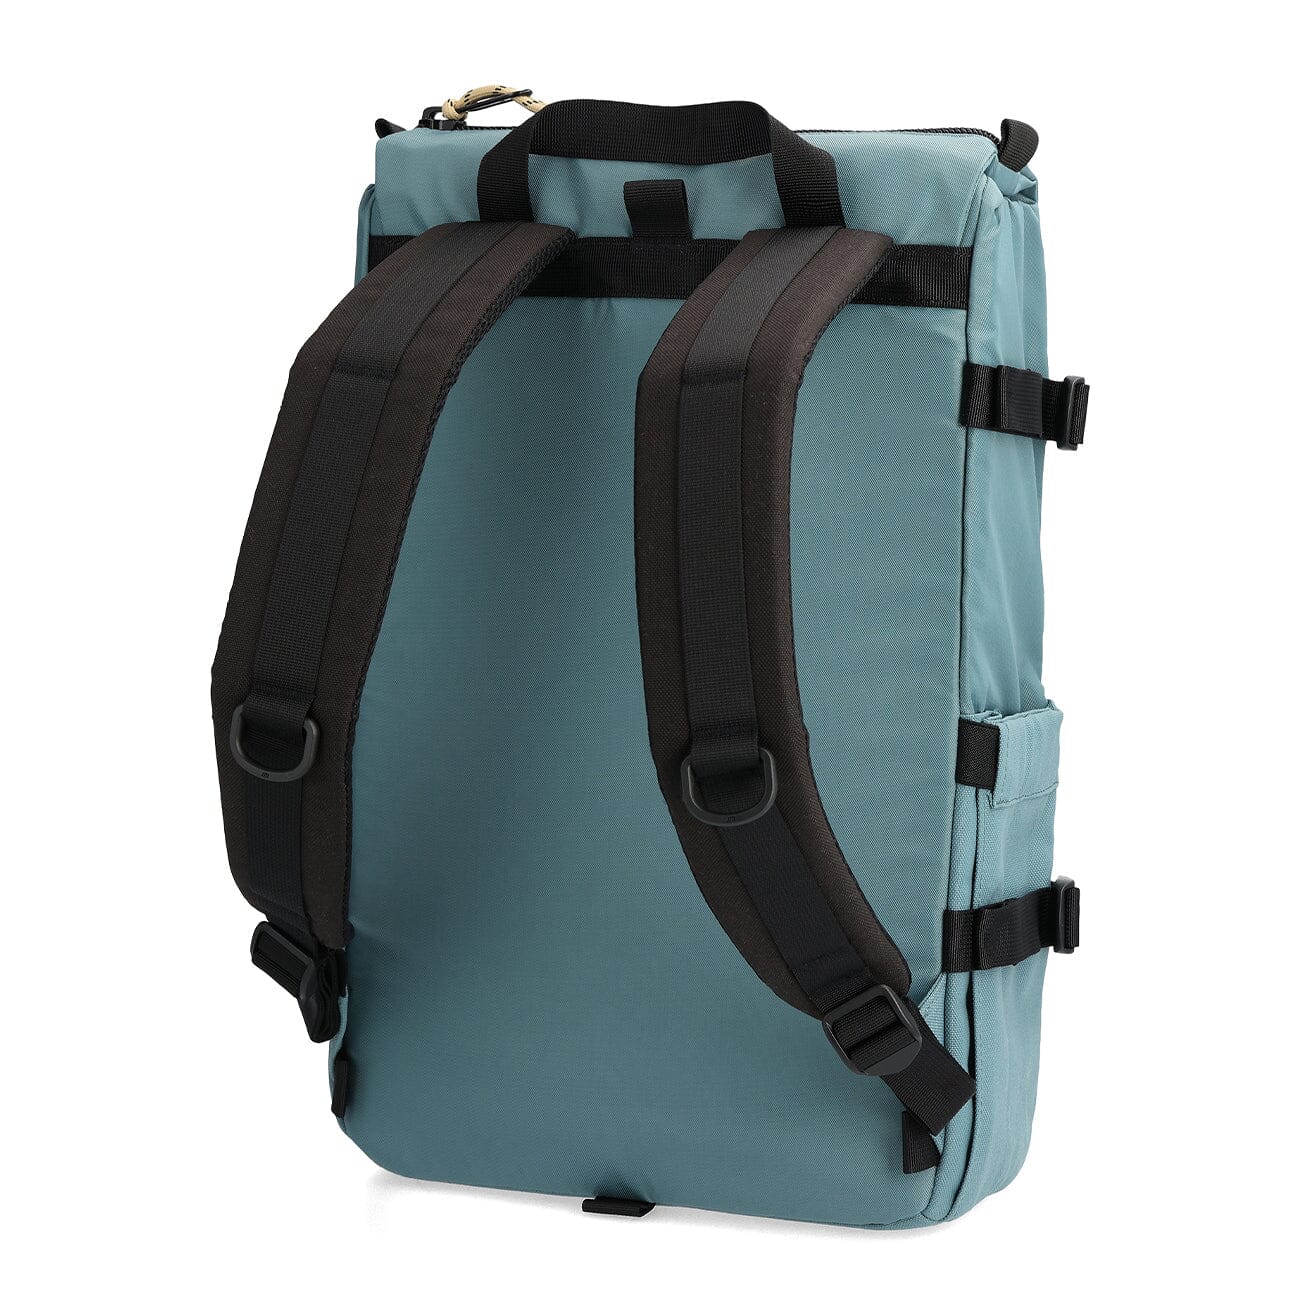 sea pine light blue recycled nylon backpack rover pack classic back